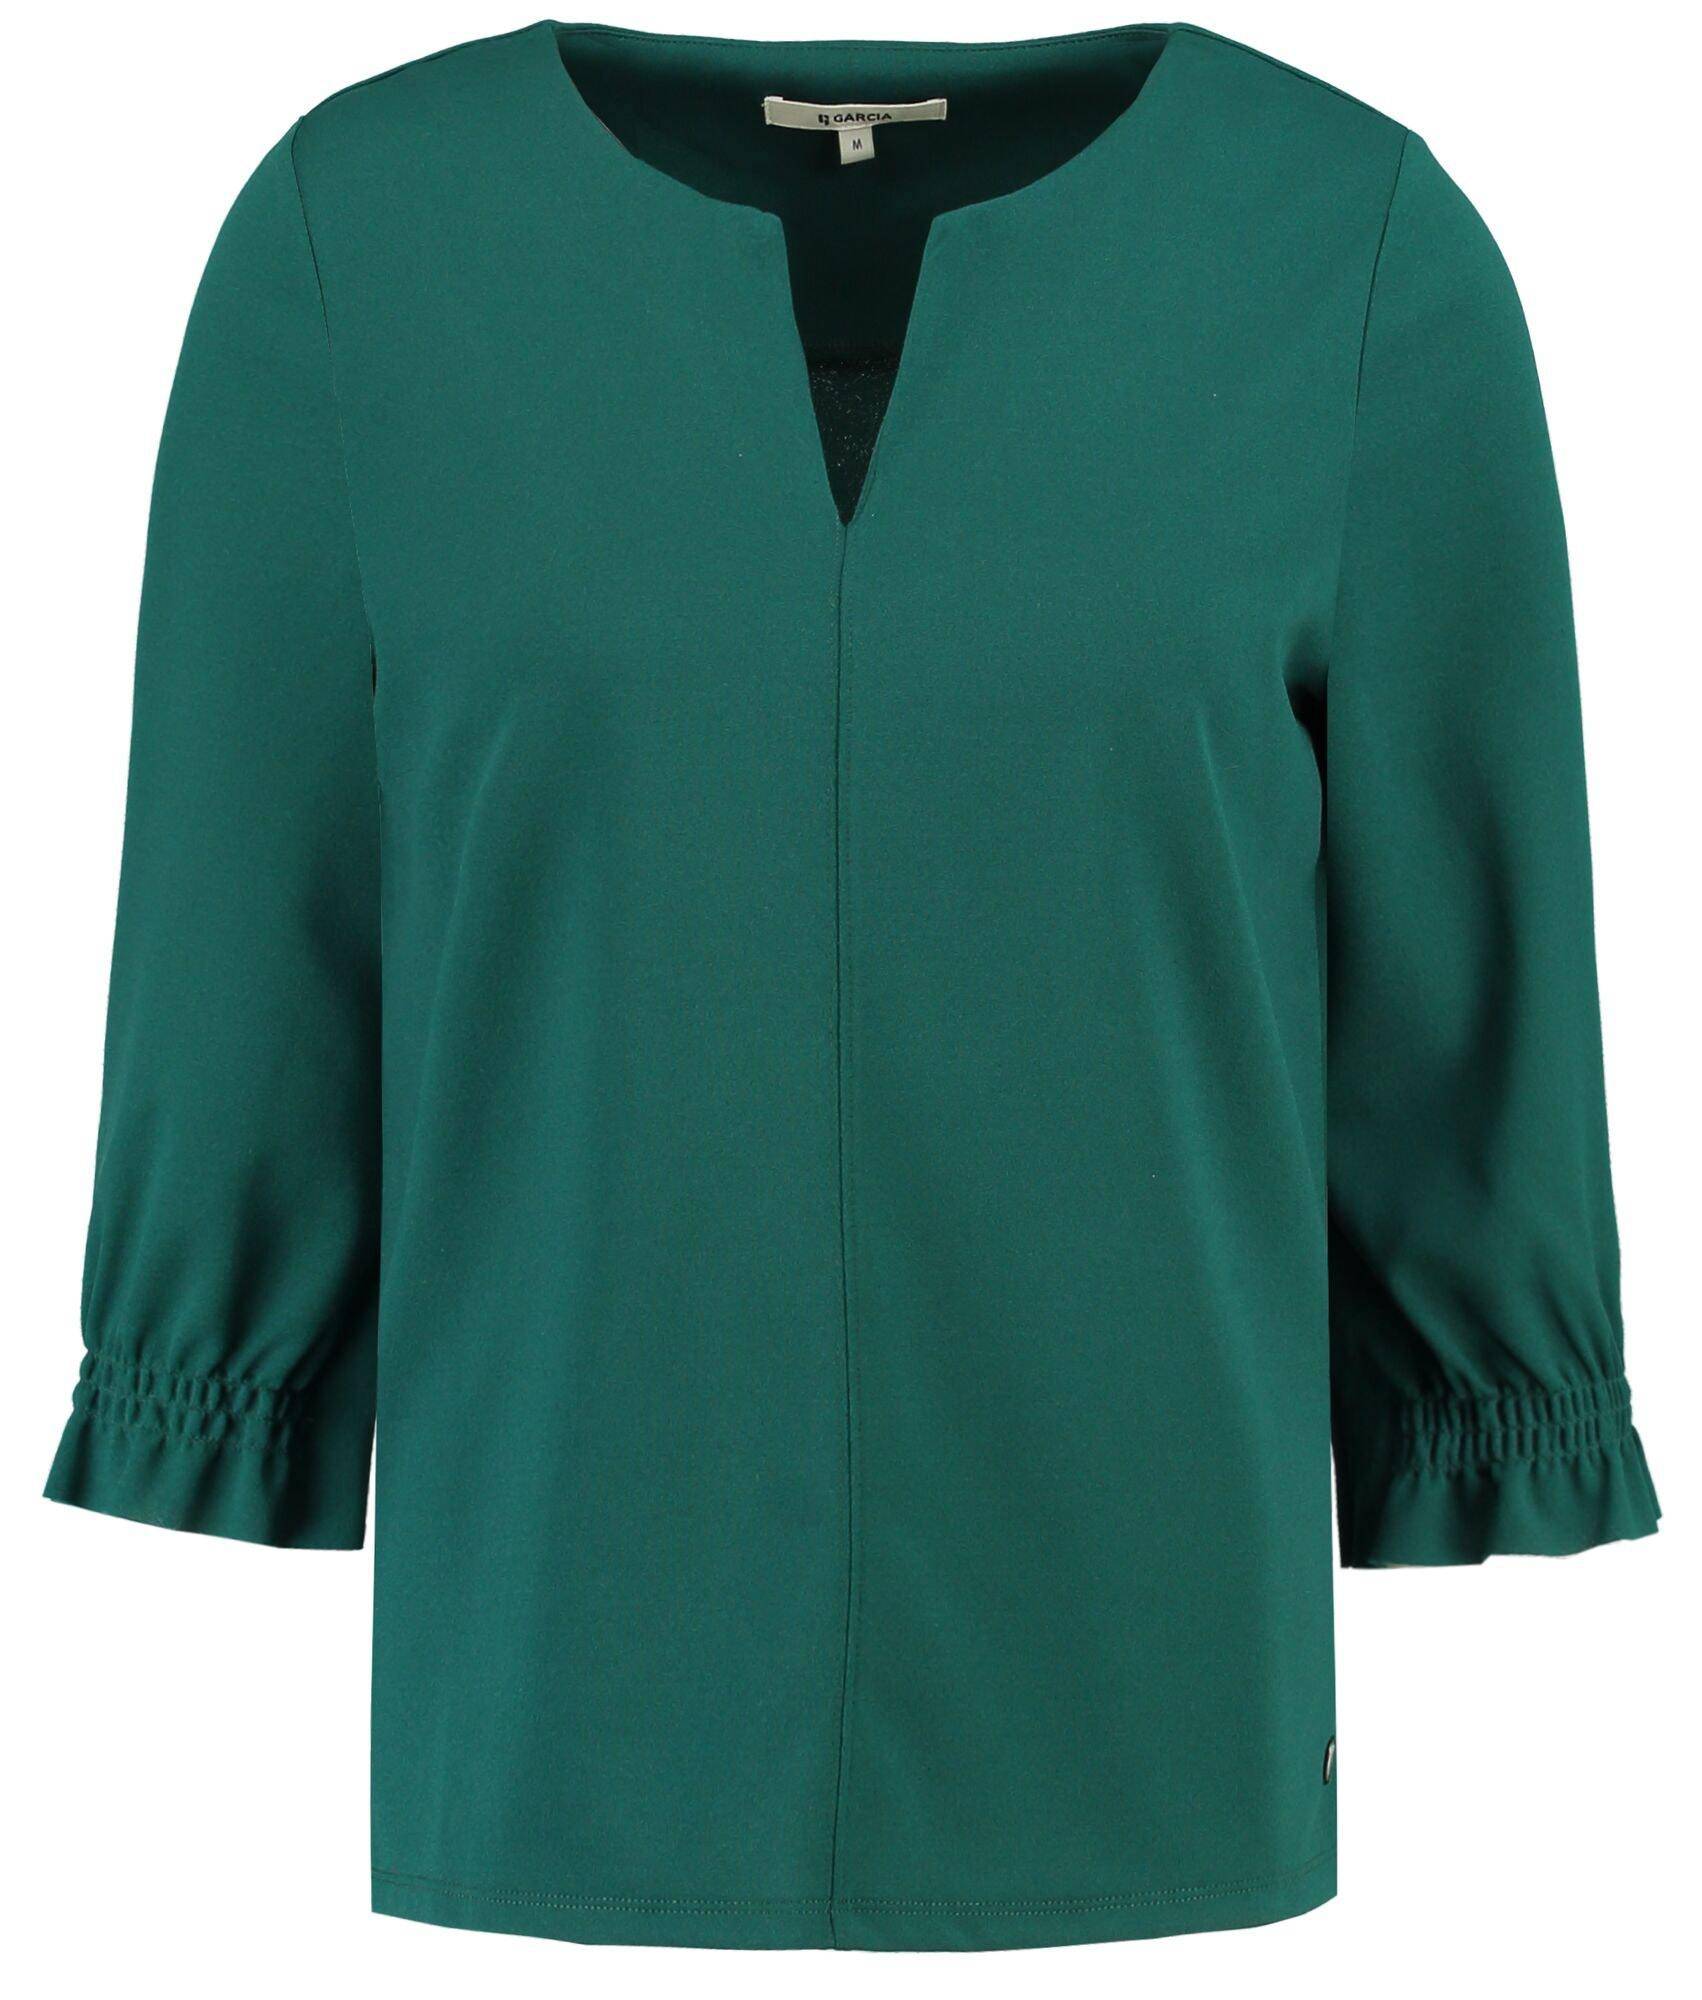 Green Garcia Blouse - Your Style Your Story